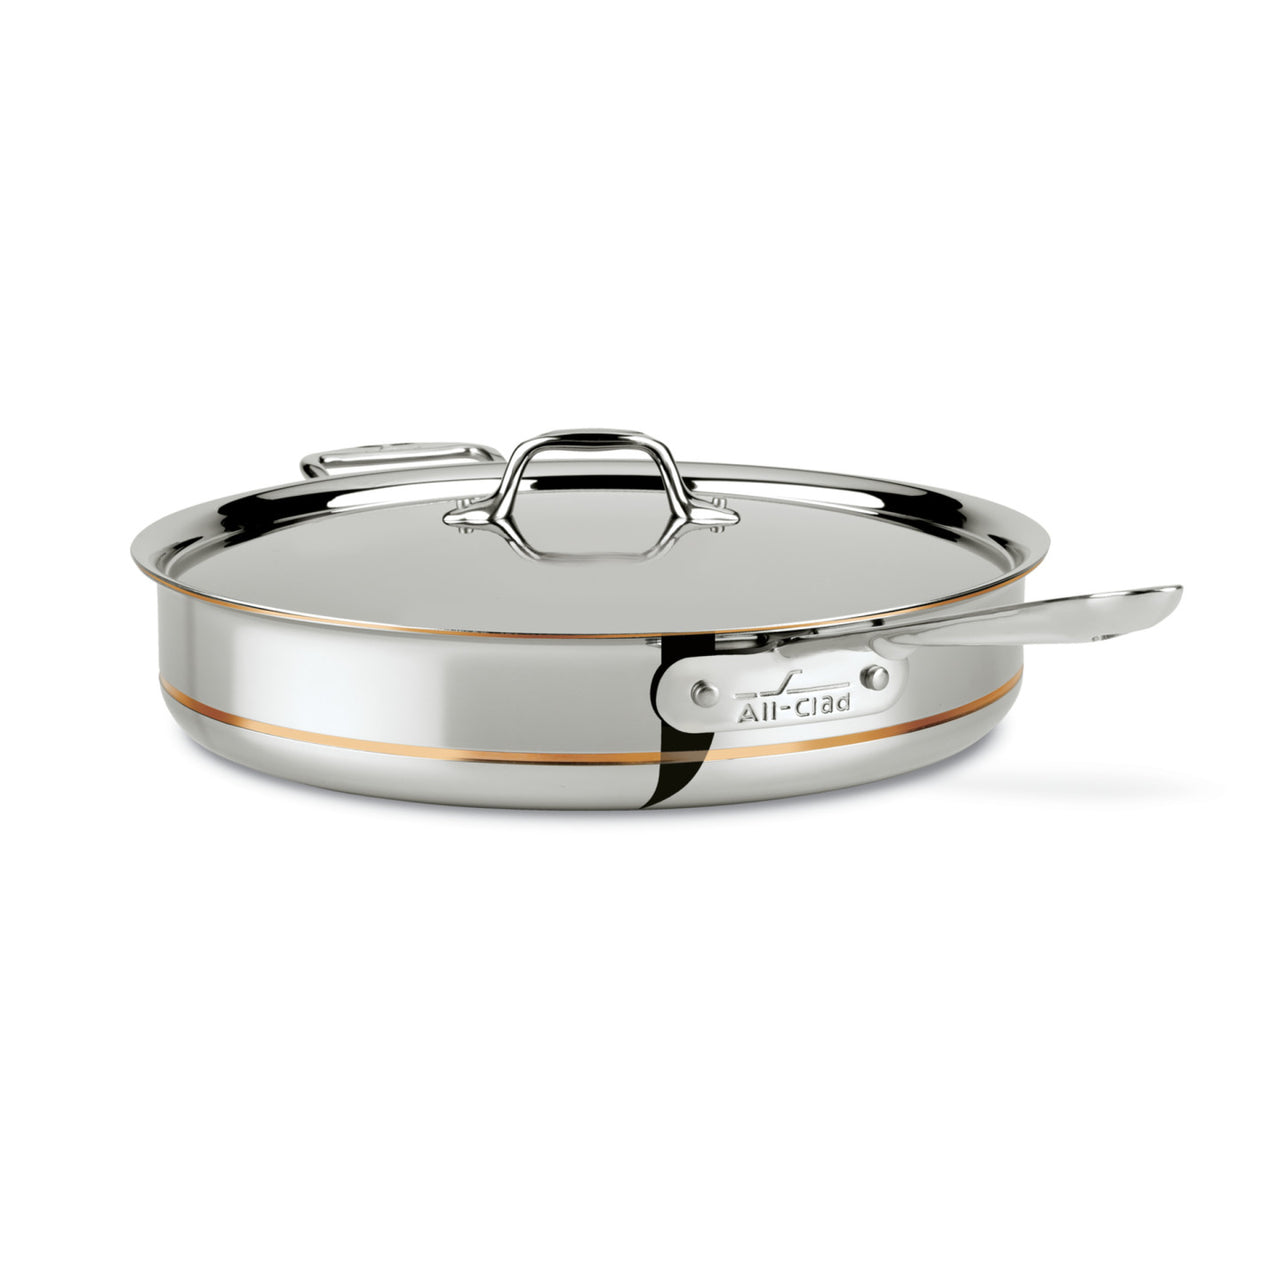 All-Clad Copper Core Saute Pan with Lid